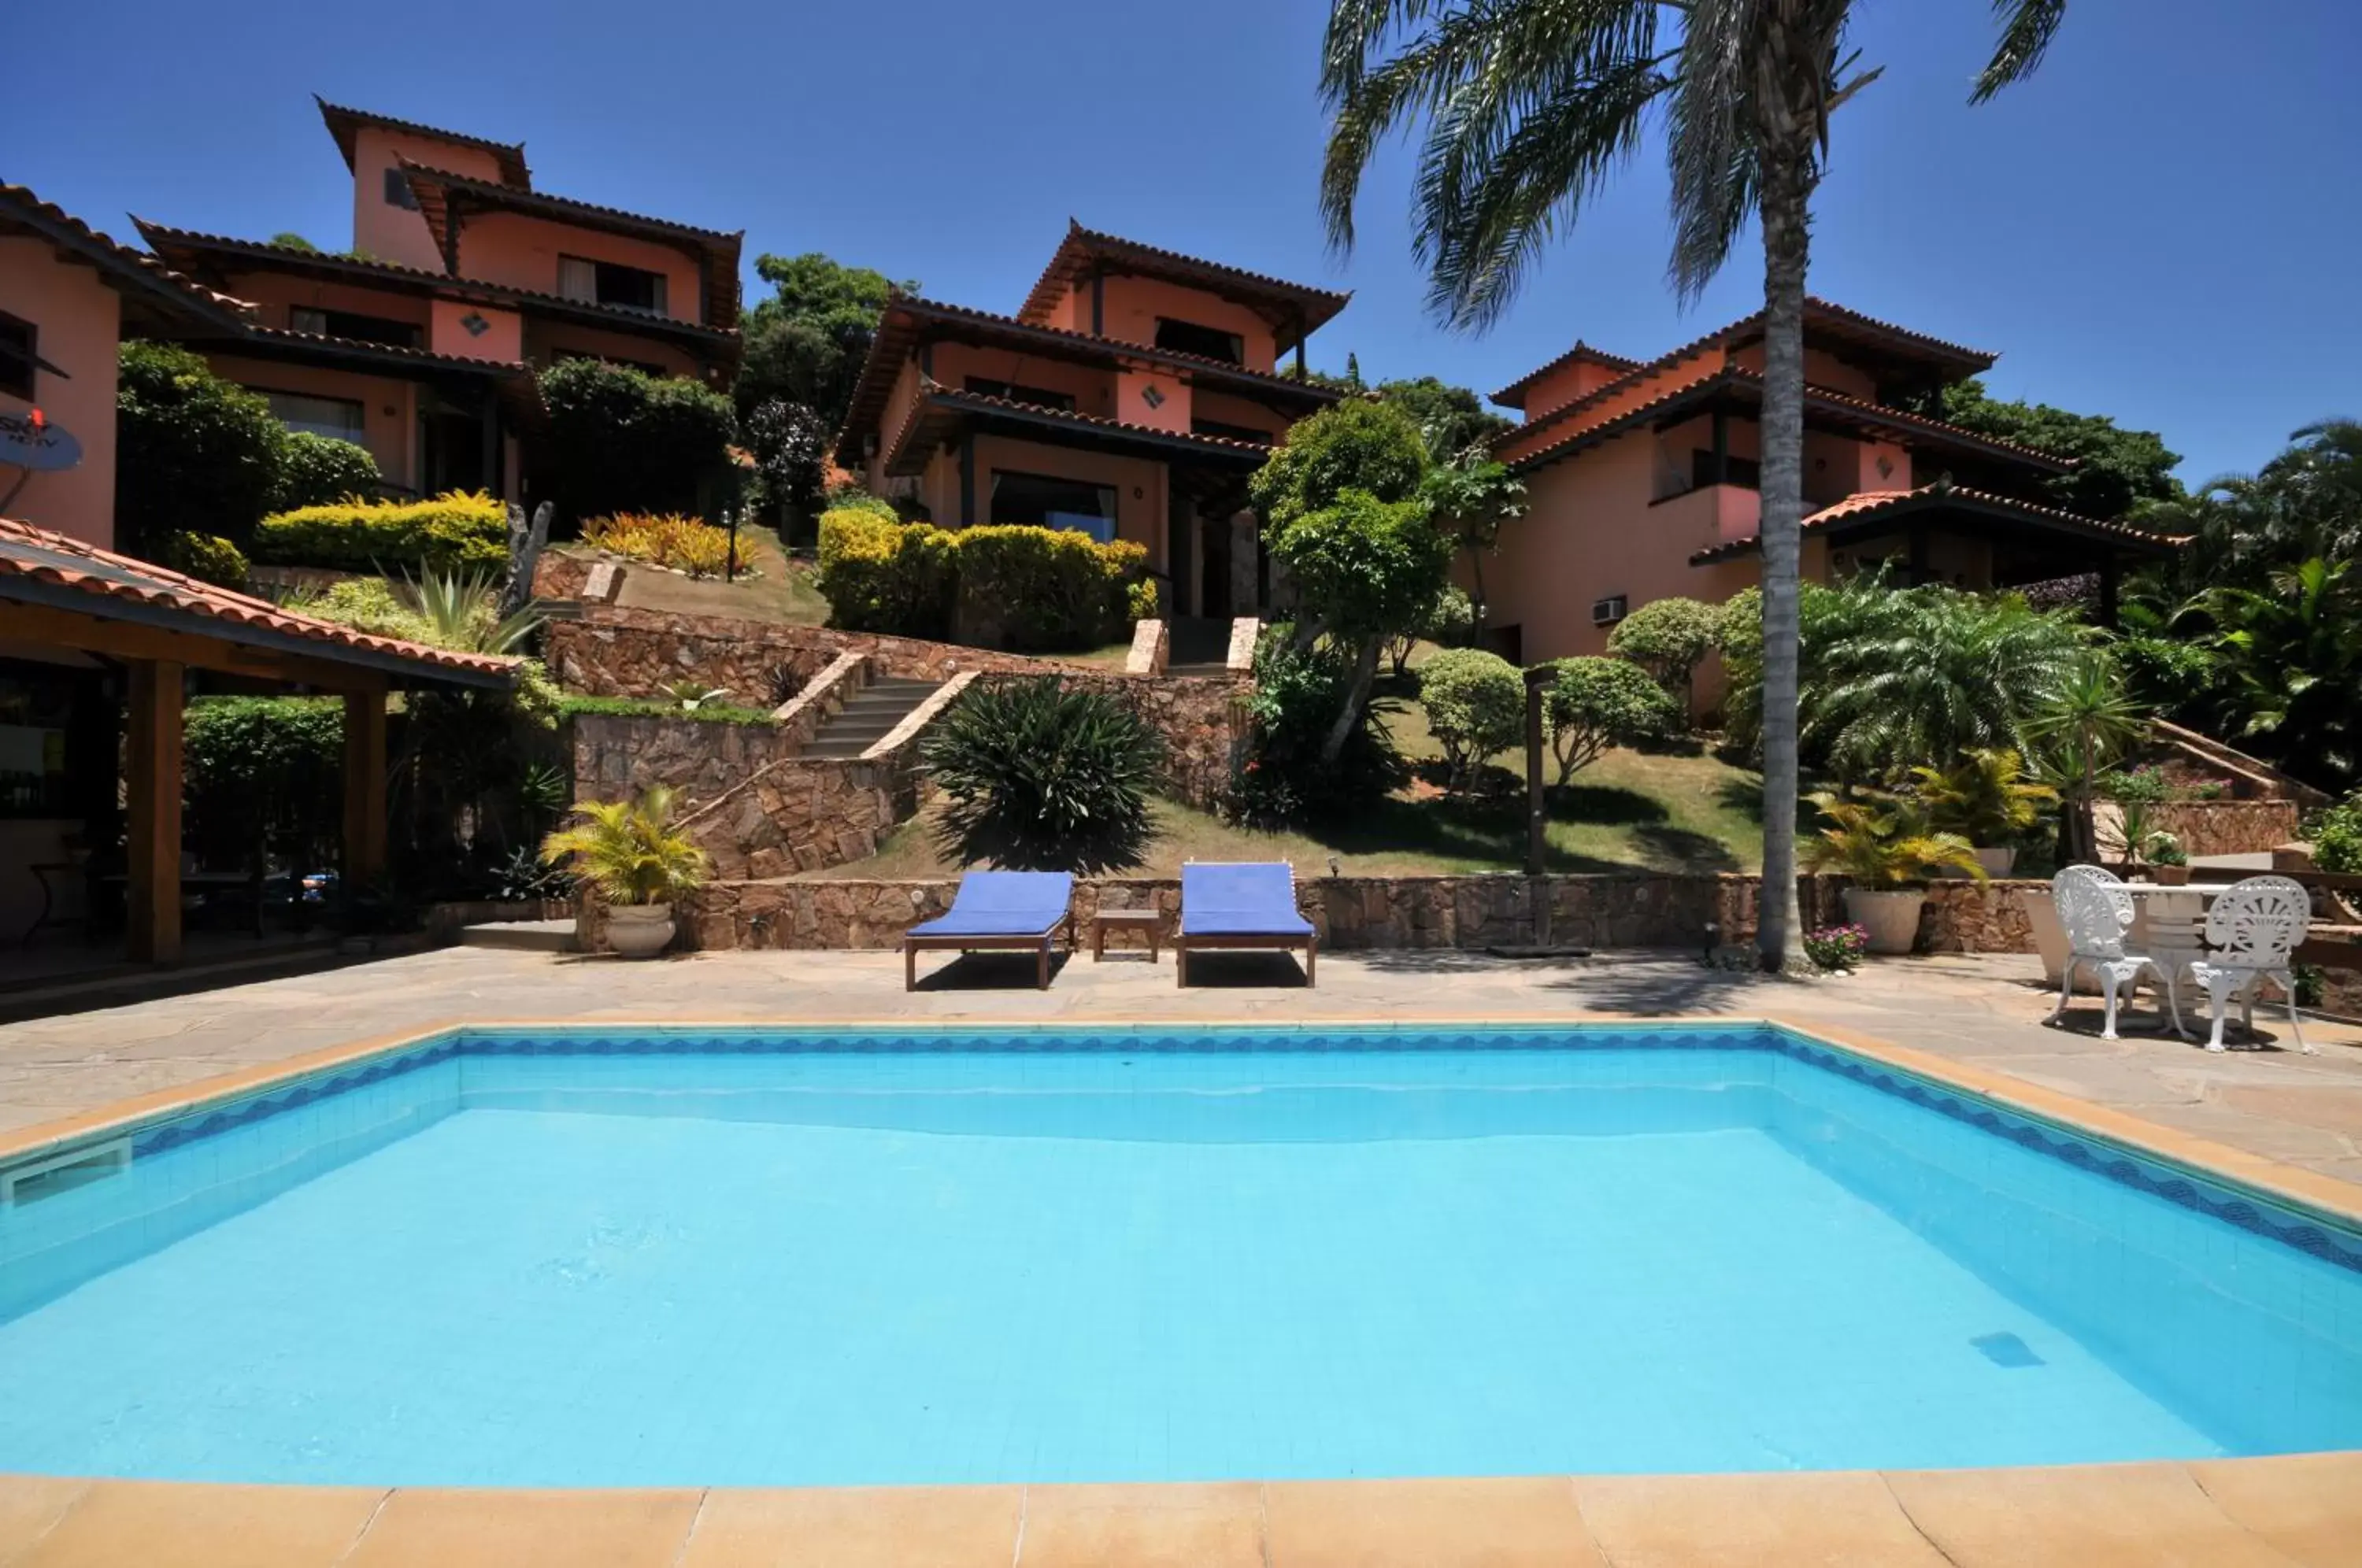 Property building, Swimming Pool in Aguabúzios Hotel